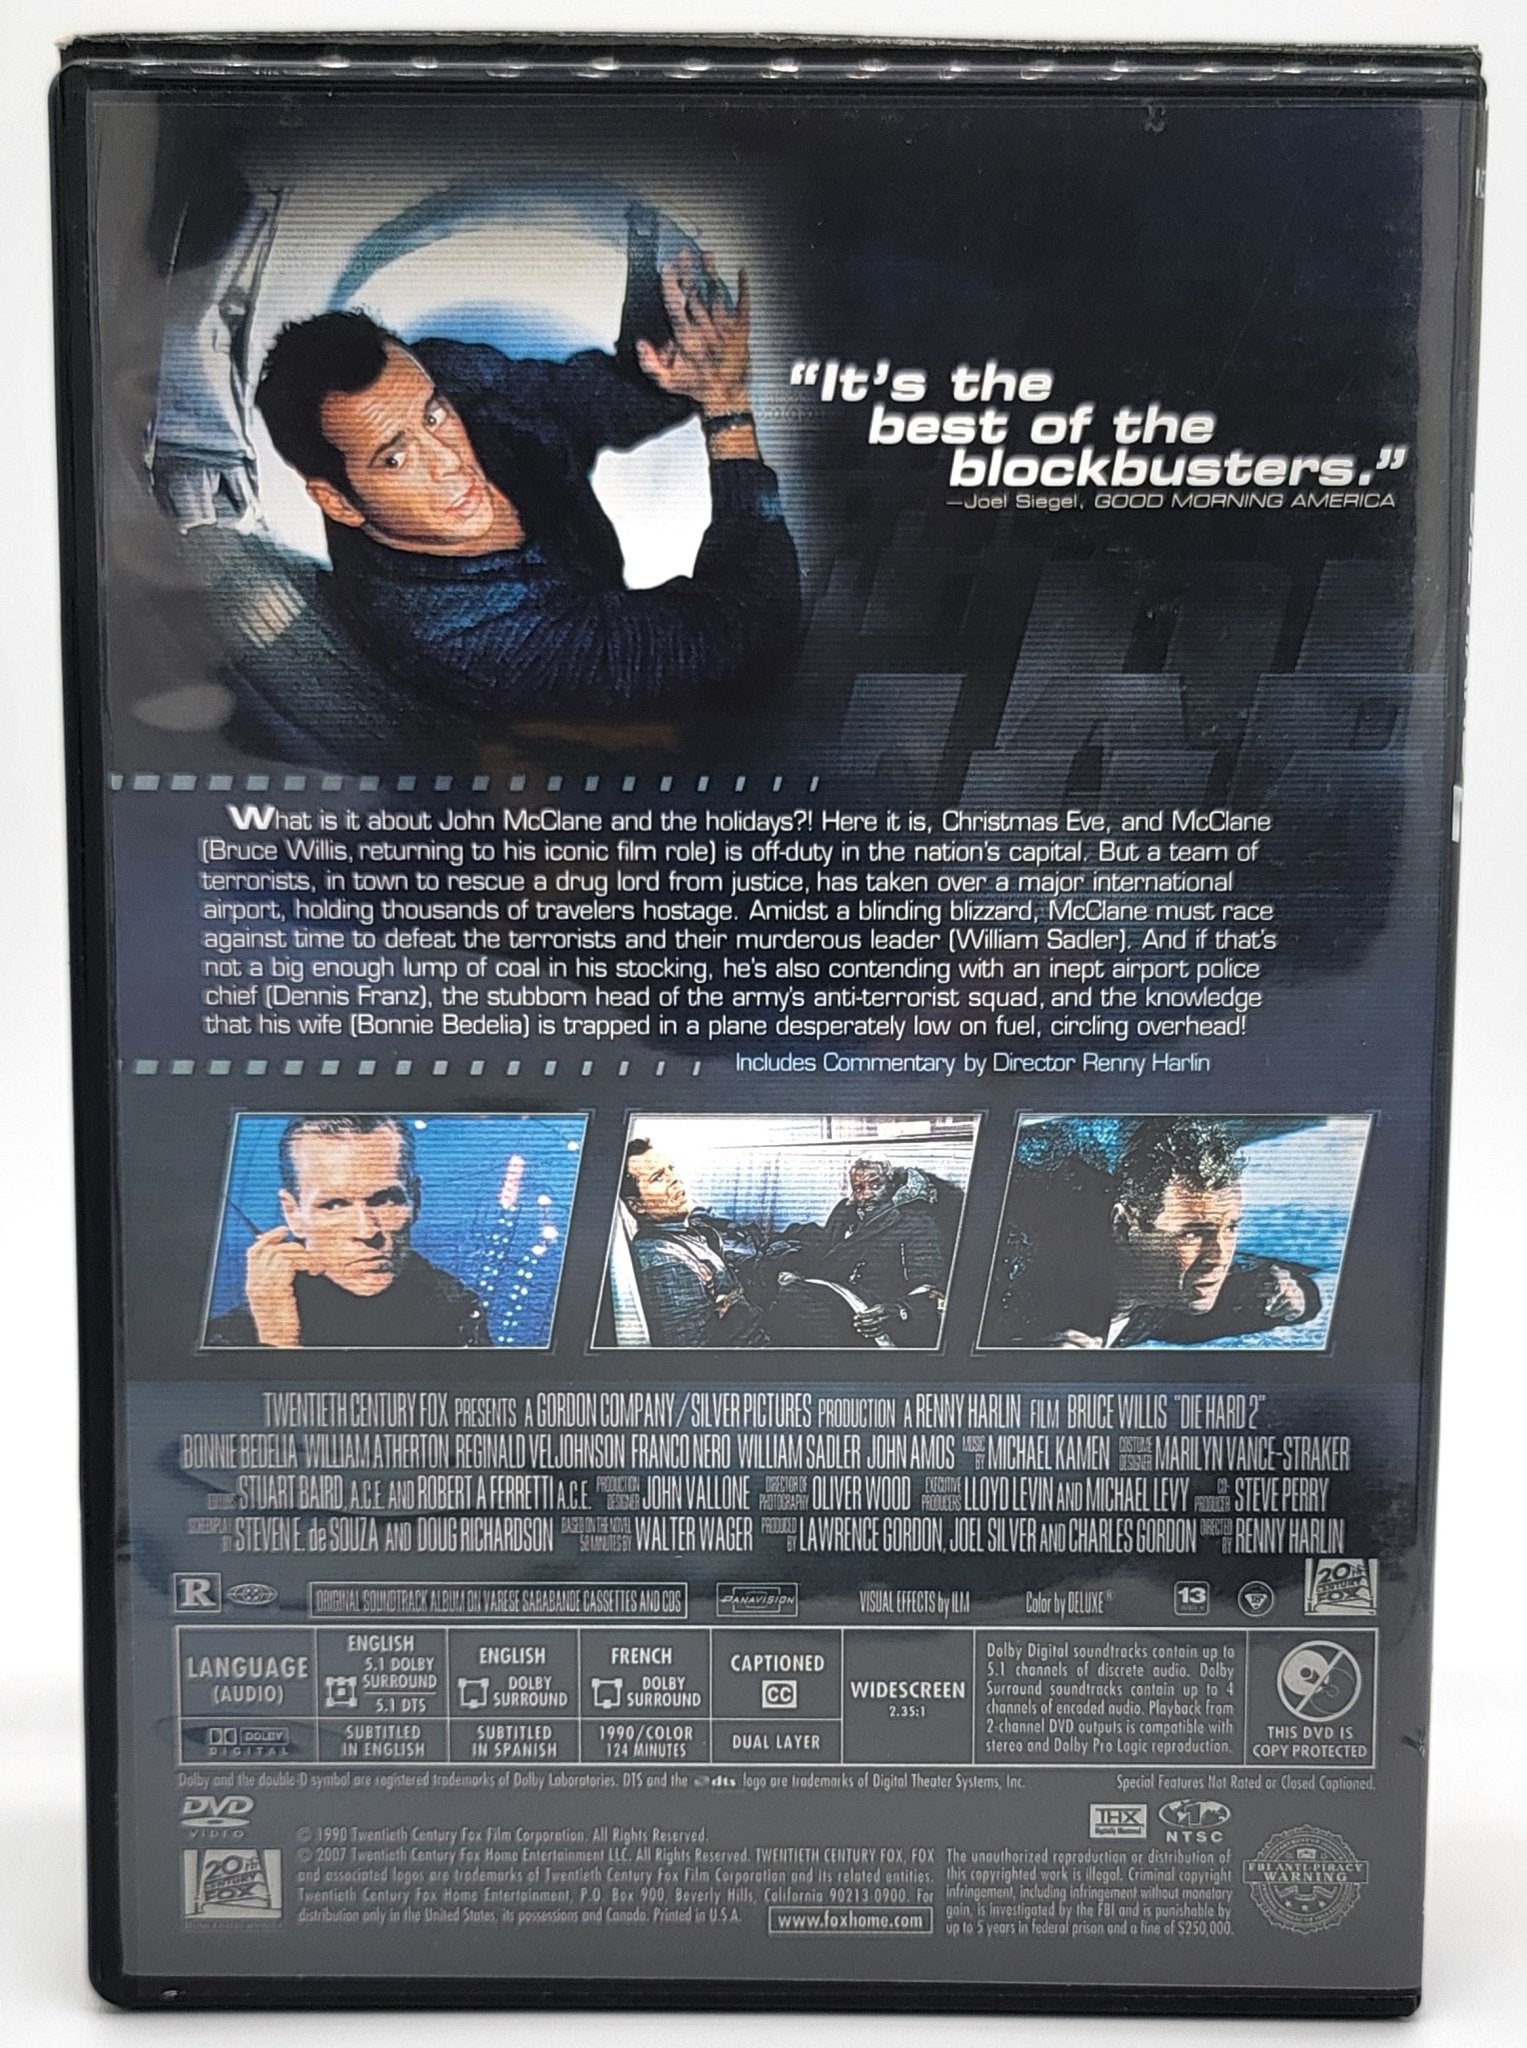 20th Century Fox Home Entertainment - Bruce Willis Die Hard Collection | DVD | Widescreen - 3 Full Movies with Special Features - DVD - Steady Bunny Shop